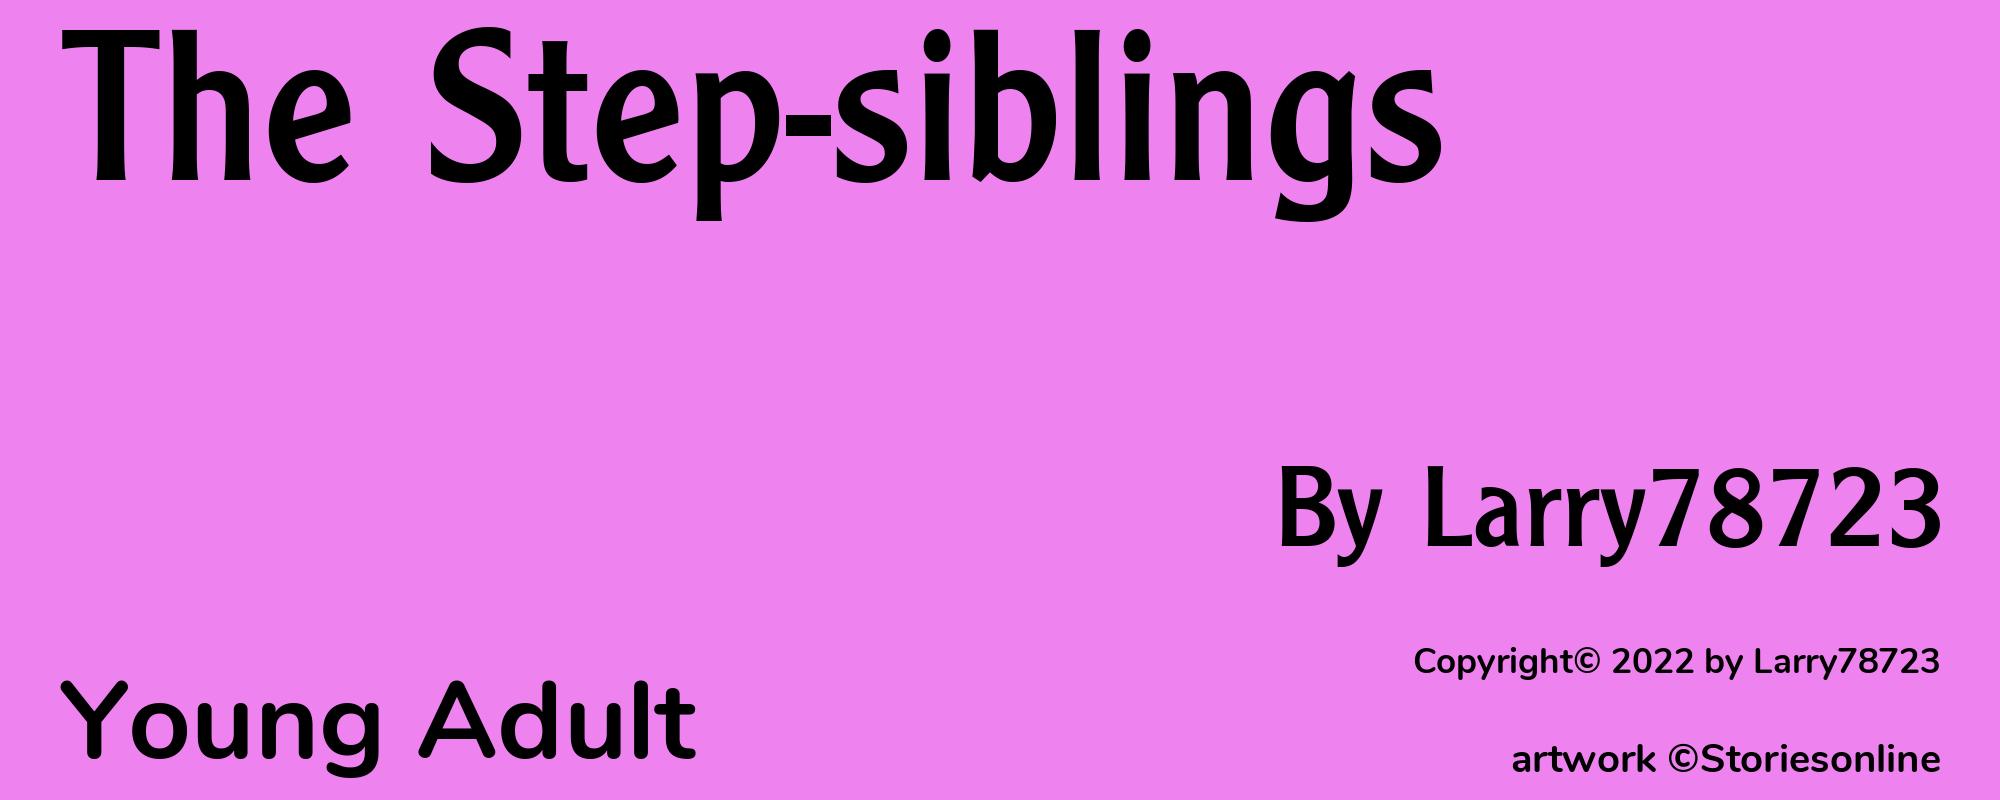 The Step-siblings - Cover